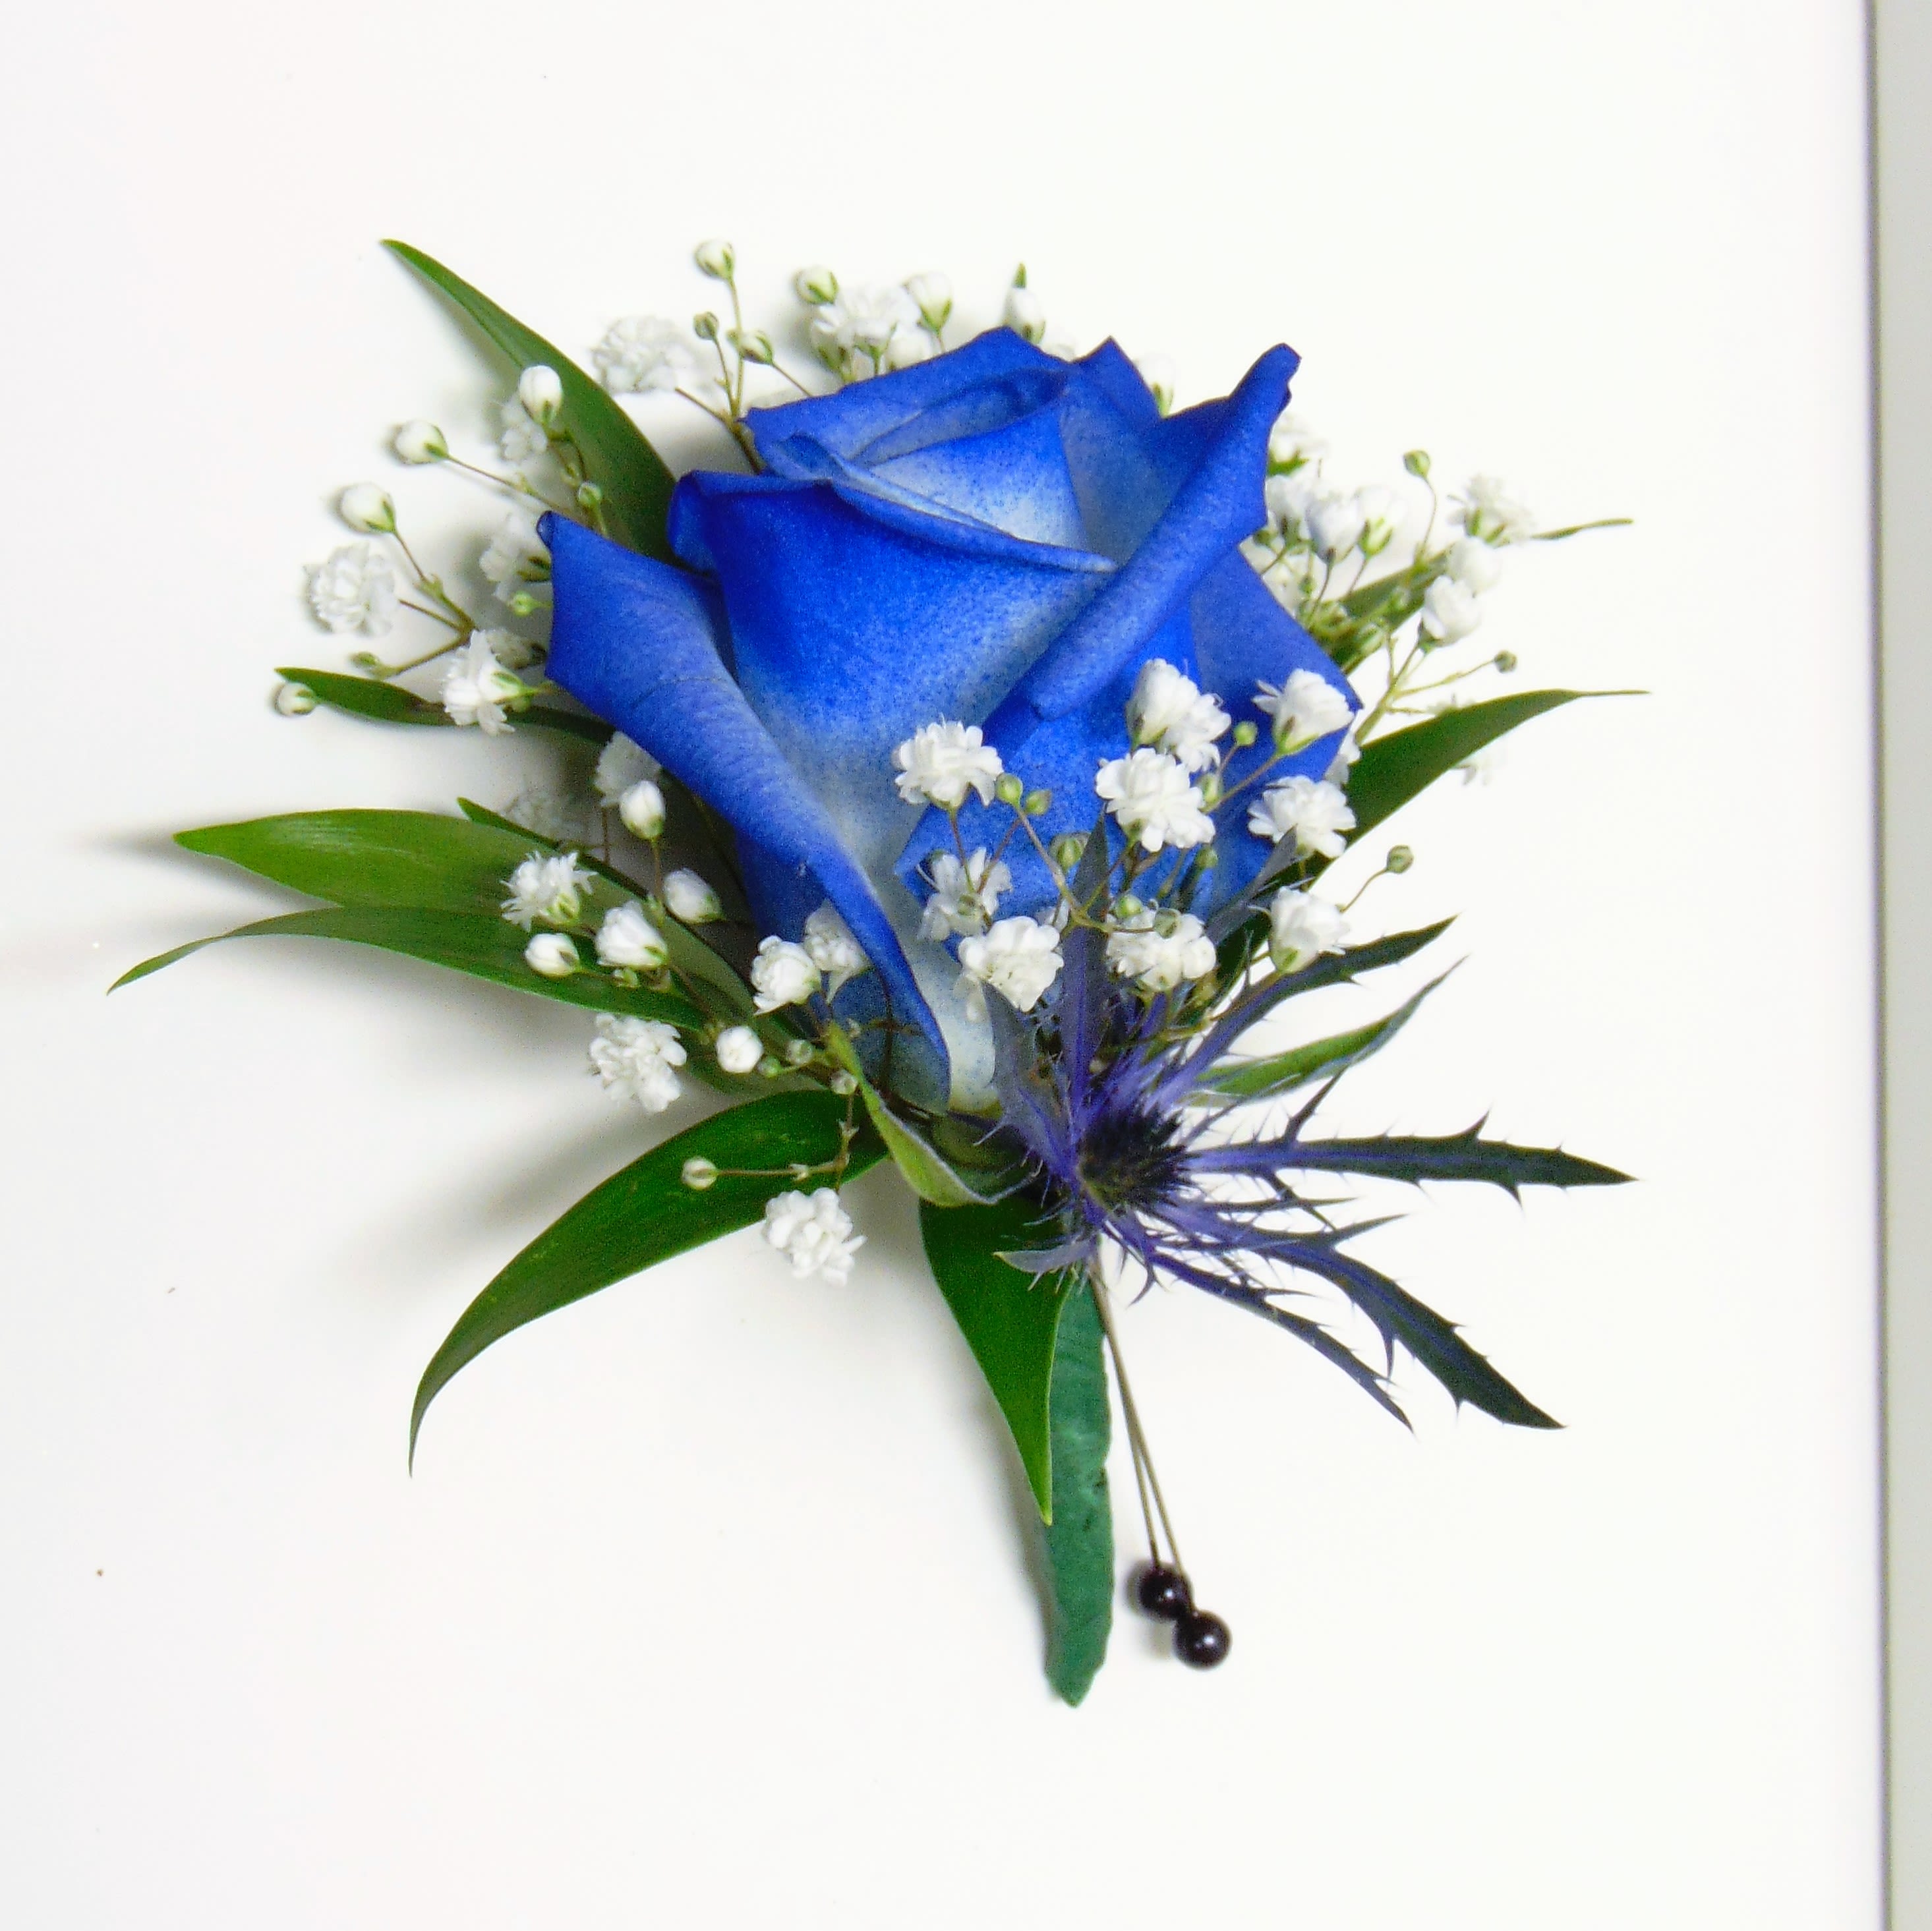 Royal Blue Rose Boutonniere - White rose tinted royal blue with white accents, greenery and standard green stem wrap.  Boutonniere box included. Standard option is pictured and deluxe option adds bling.